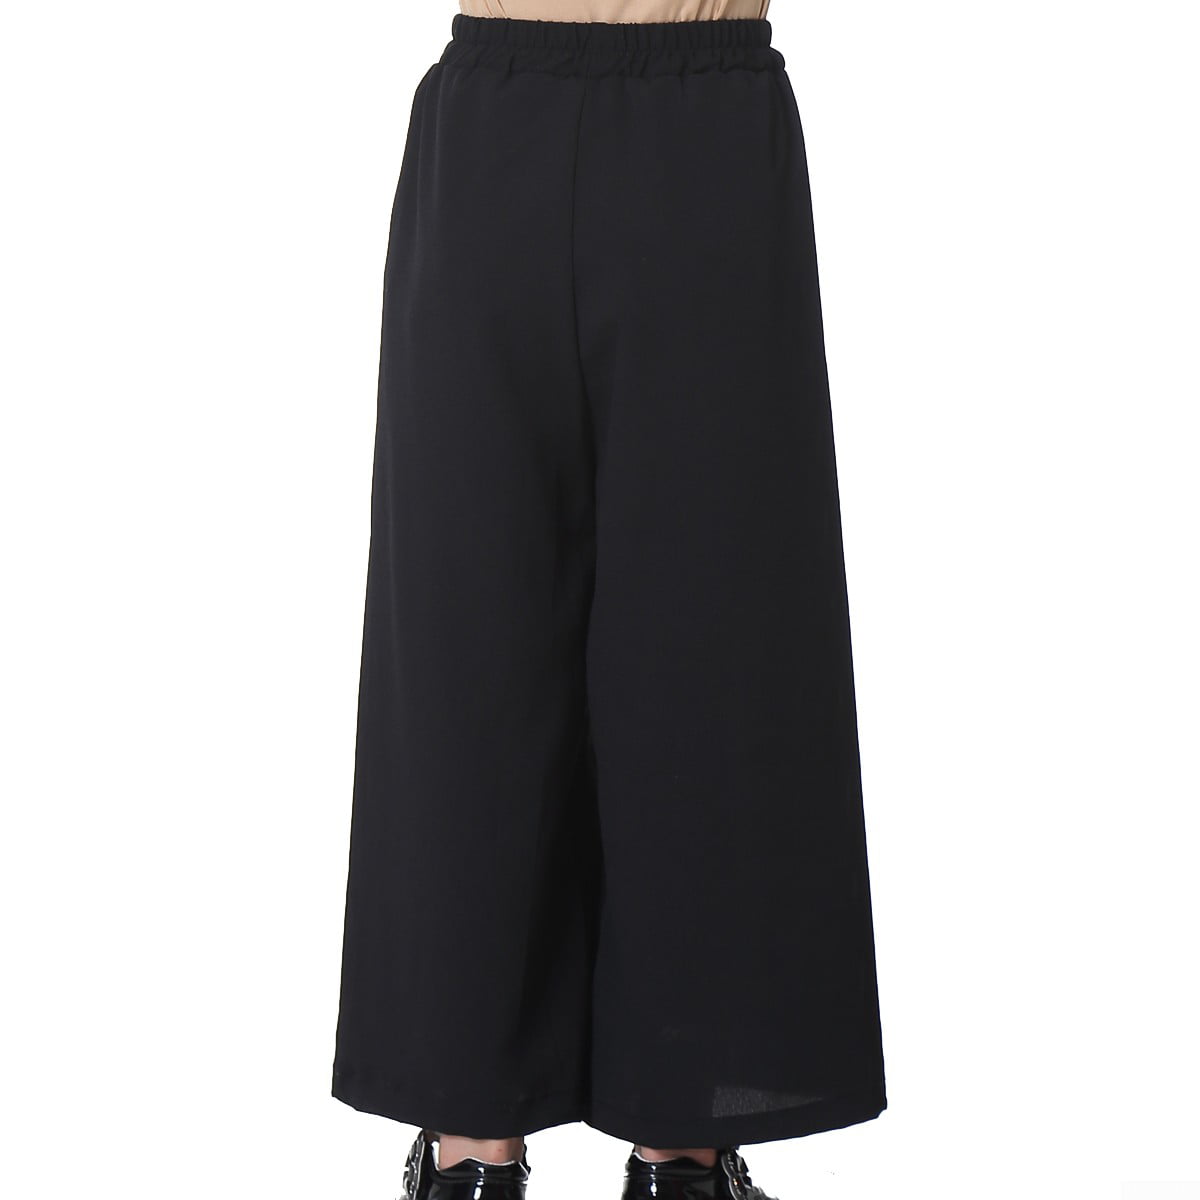 Yeahdor Kids Girls Summer Elastic Waist A-Line Pleated Chiffon Cropped Wide Leg Pants Casual Lounge Loose Trousers 